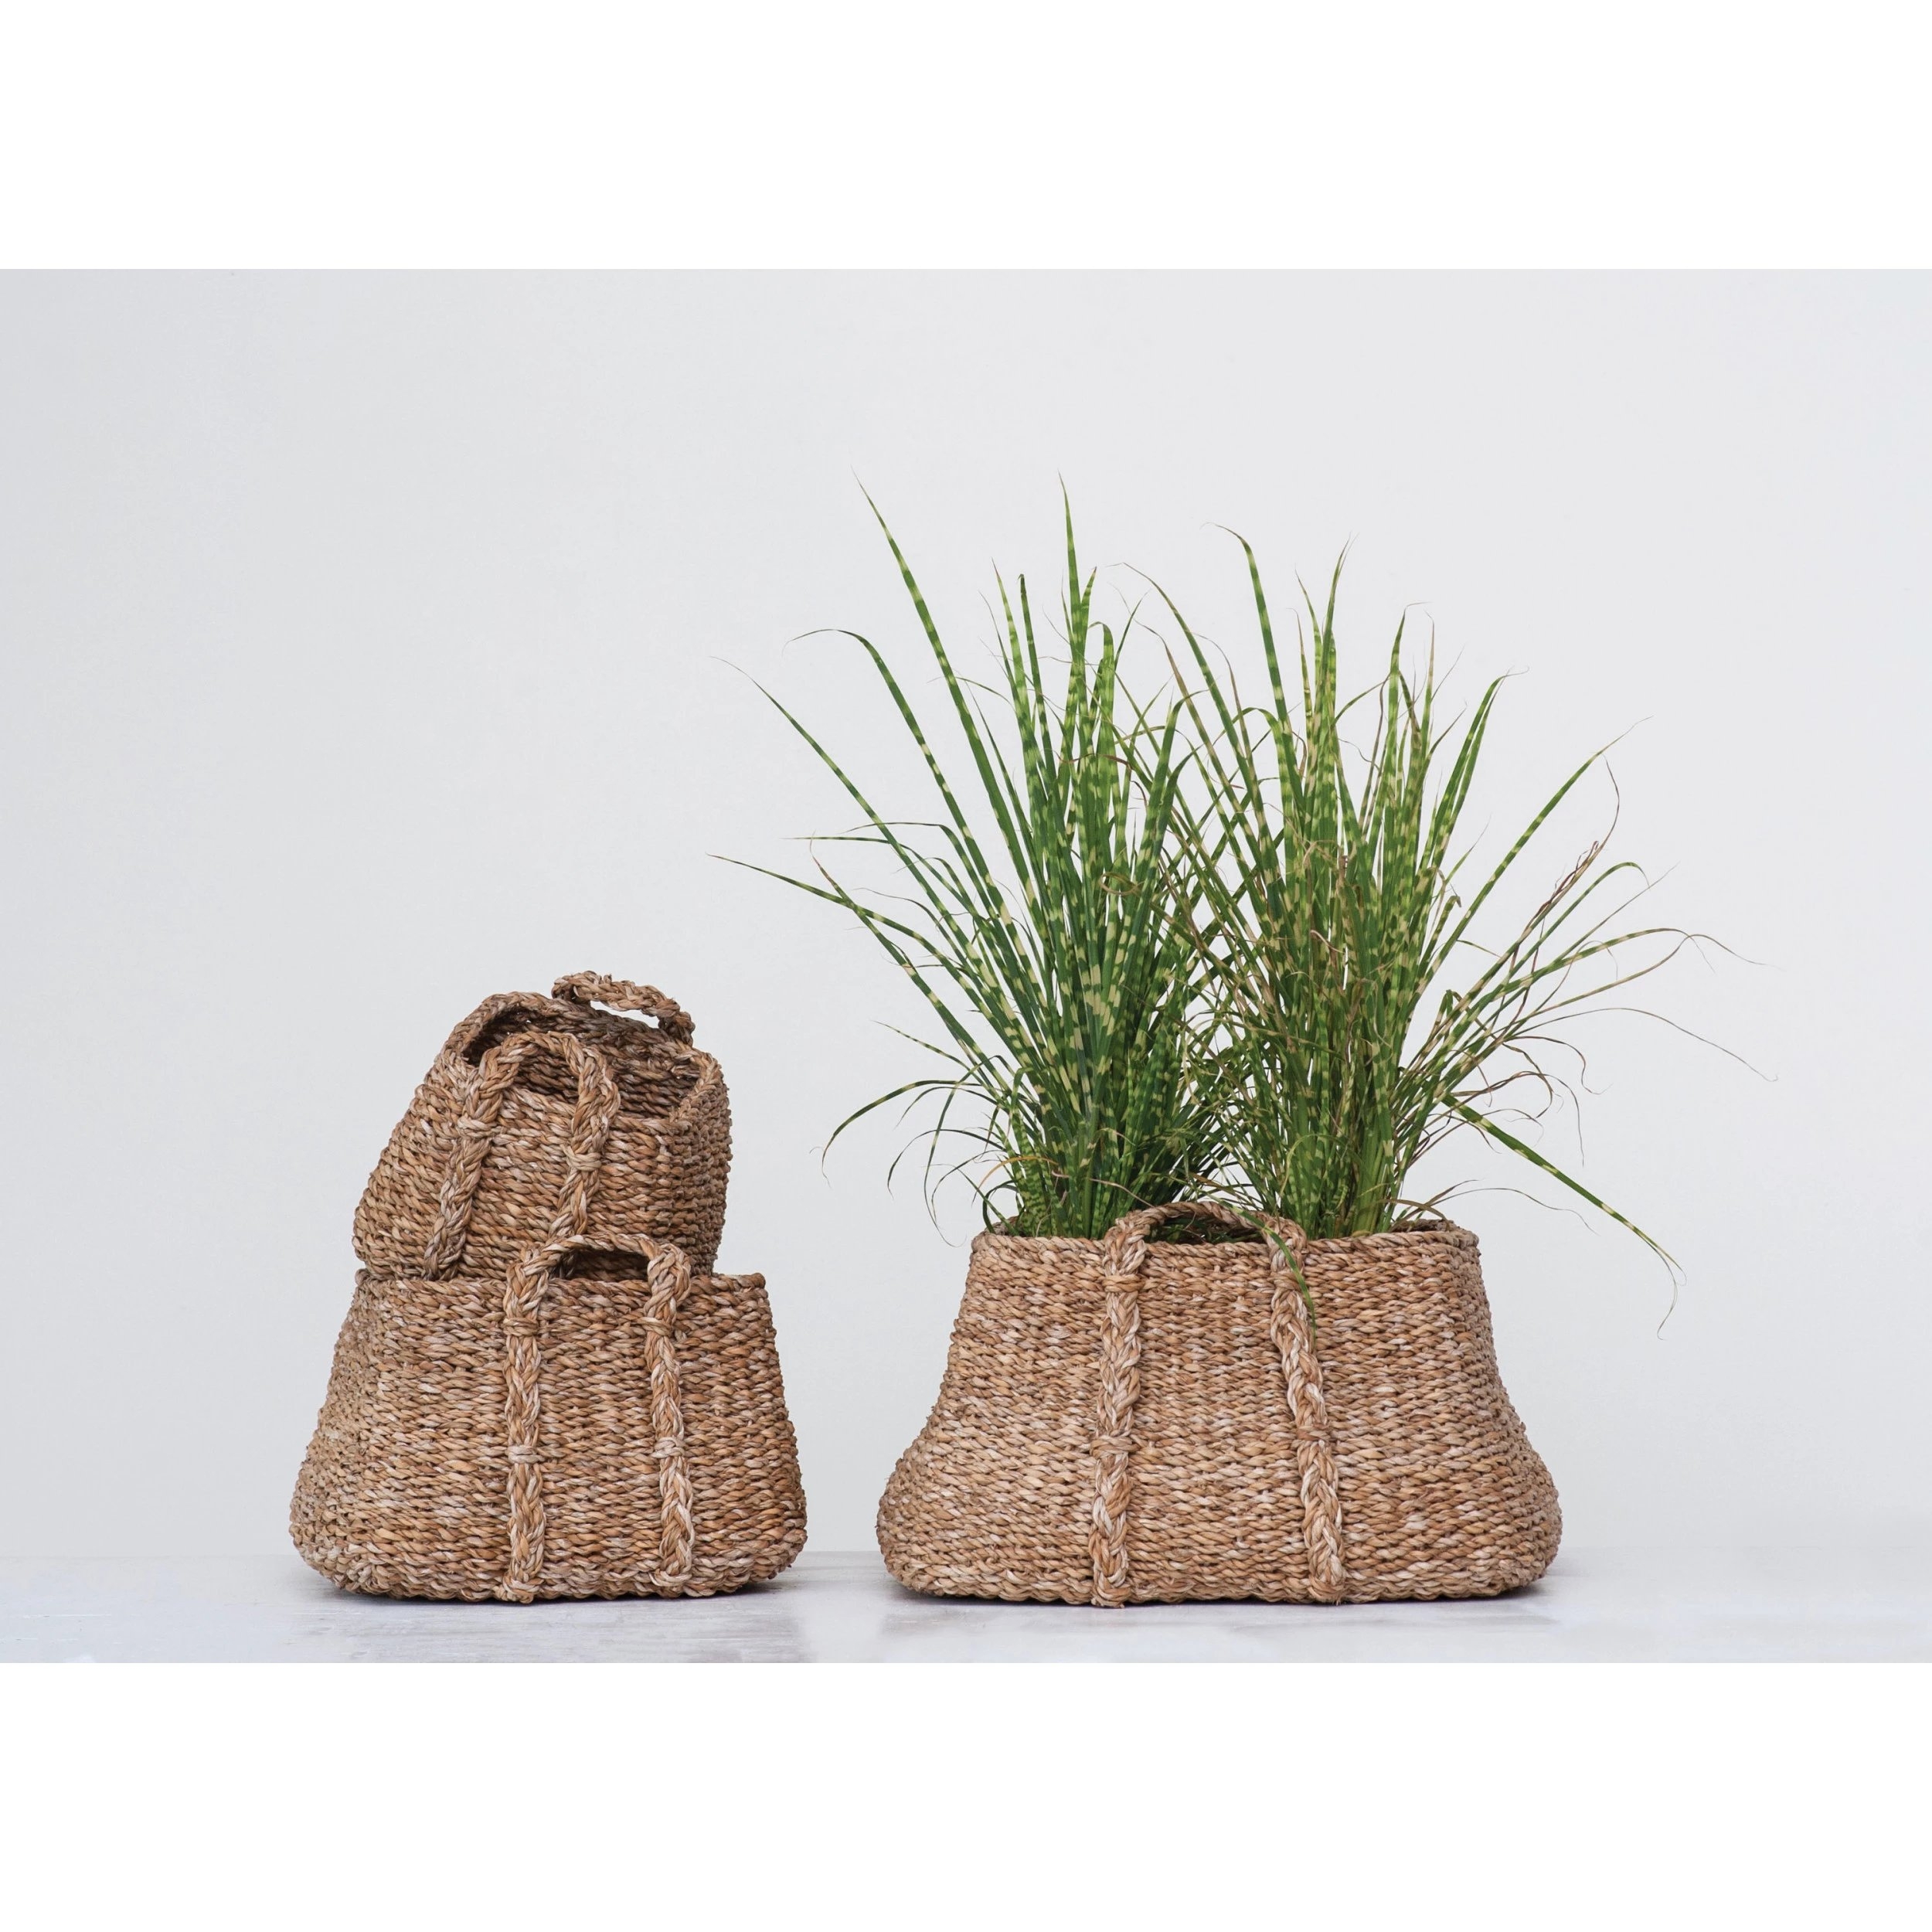 Brown Natural Seagrass Baskets with Handles (Set of 3 Sizes) - Image 1